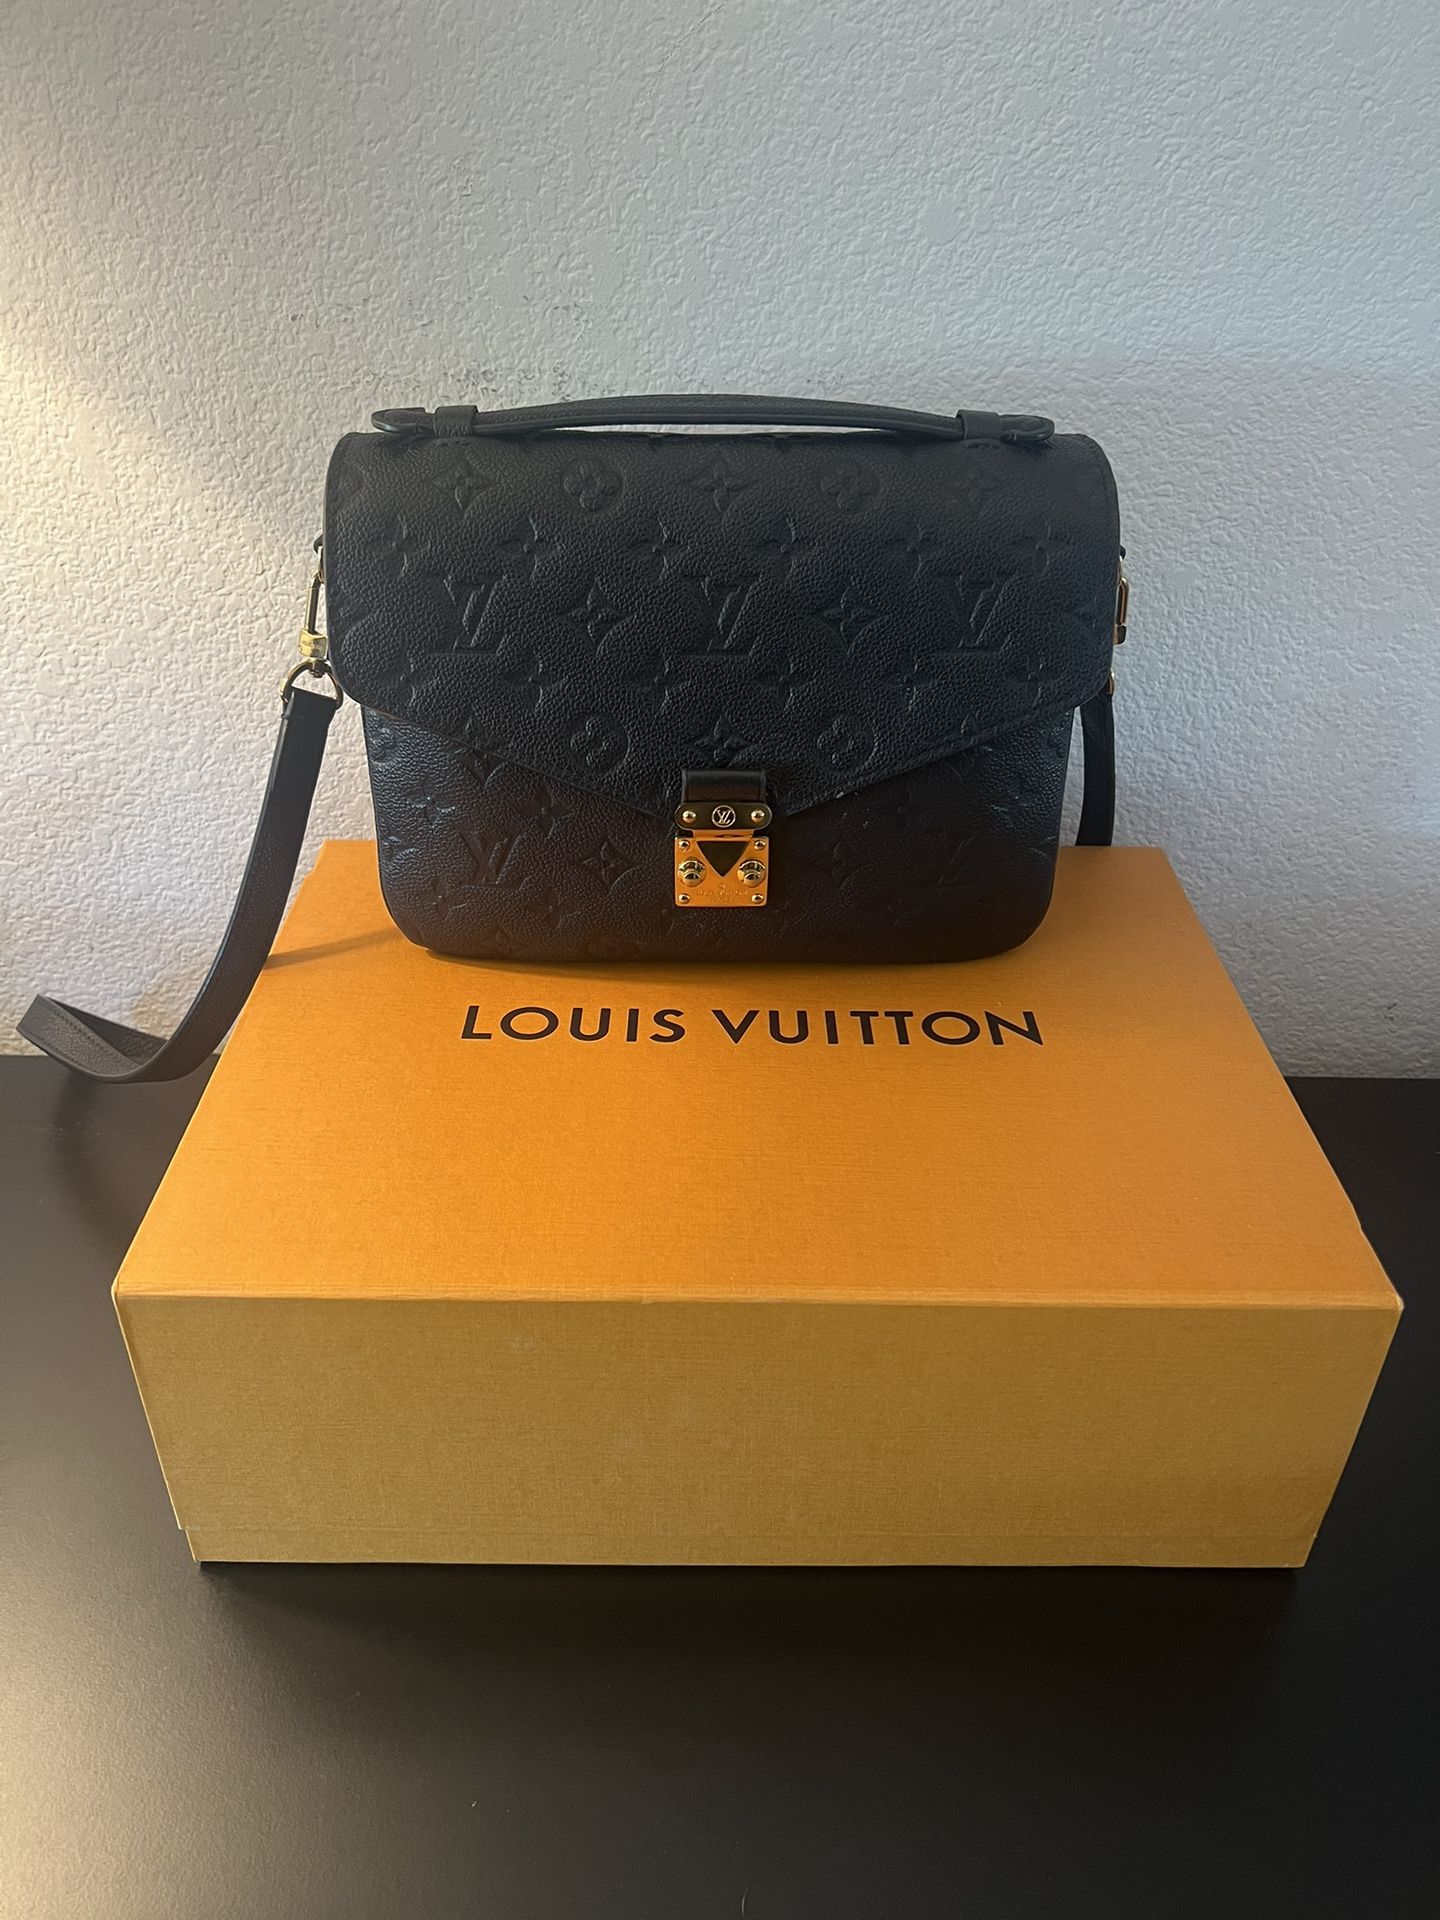 Louis Vuitton Pochette Black And Gold Bag for Sale in Redwood